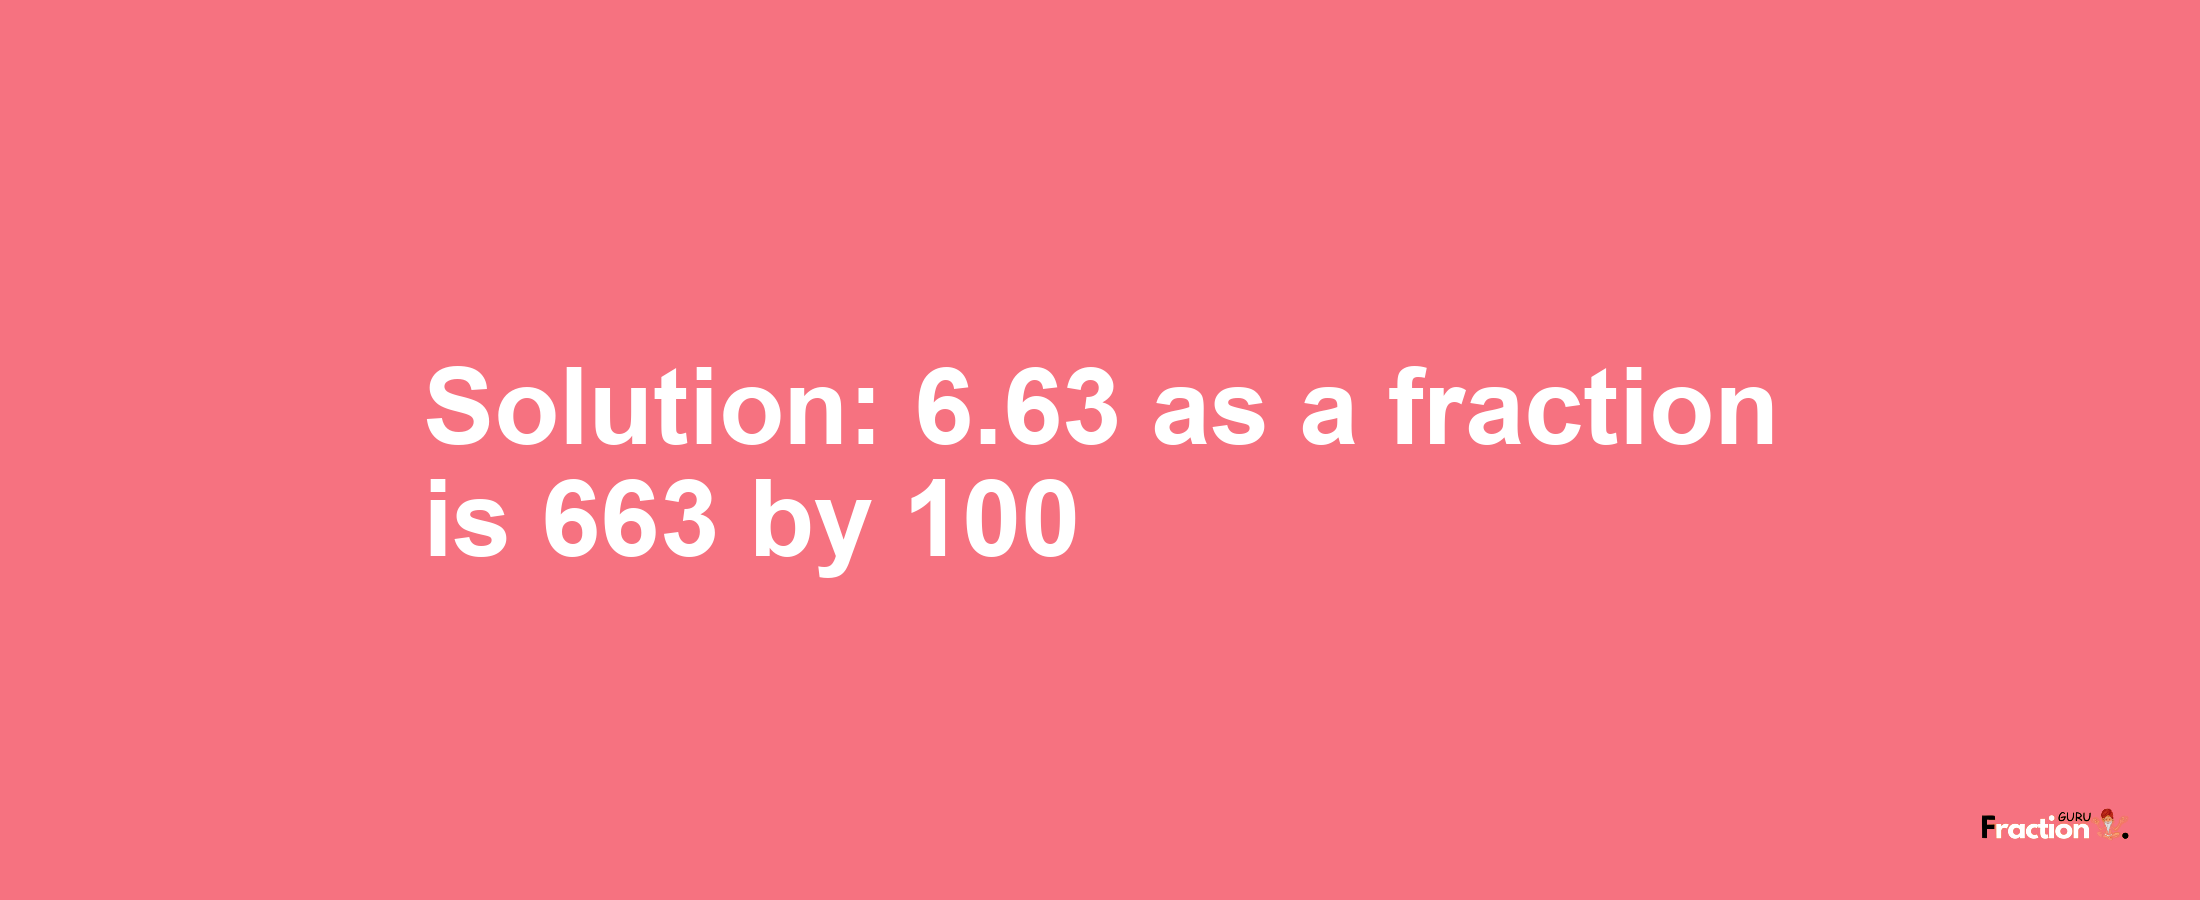 Solution:6.63 as a fraction is 663/100